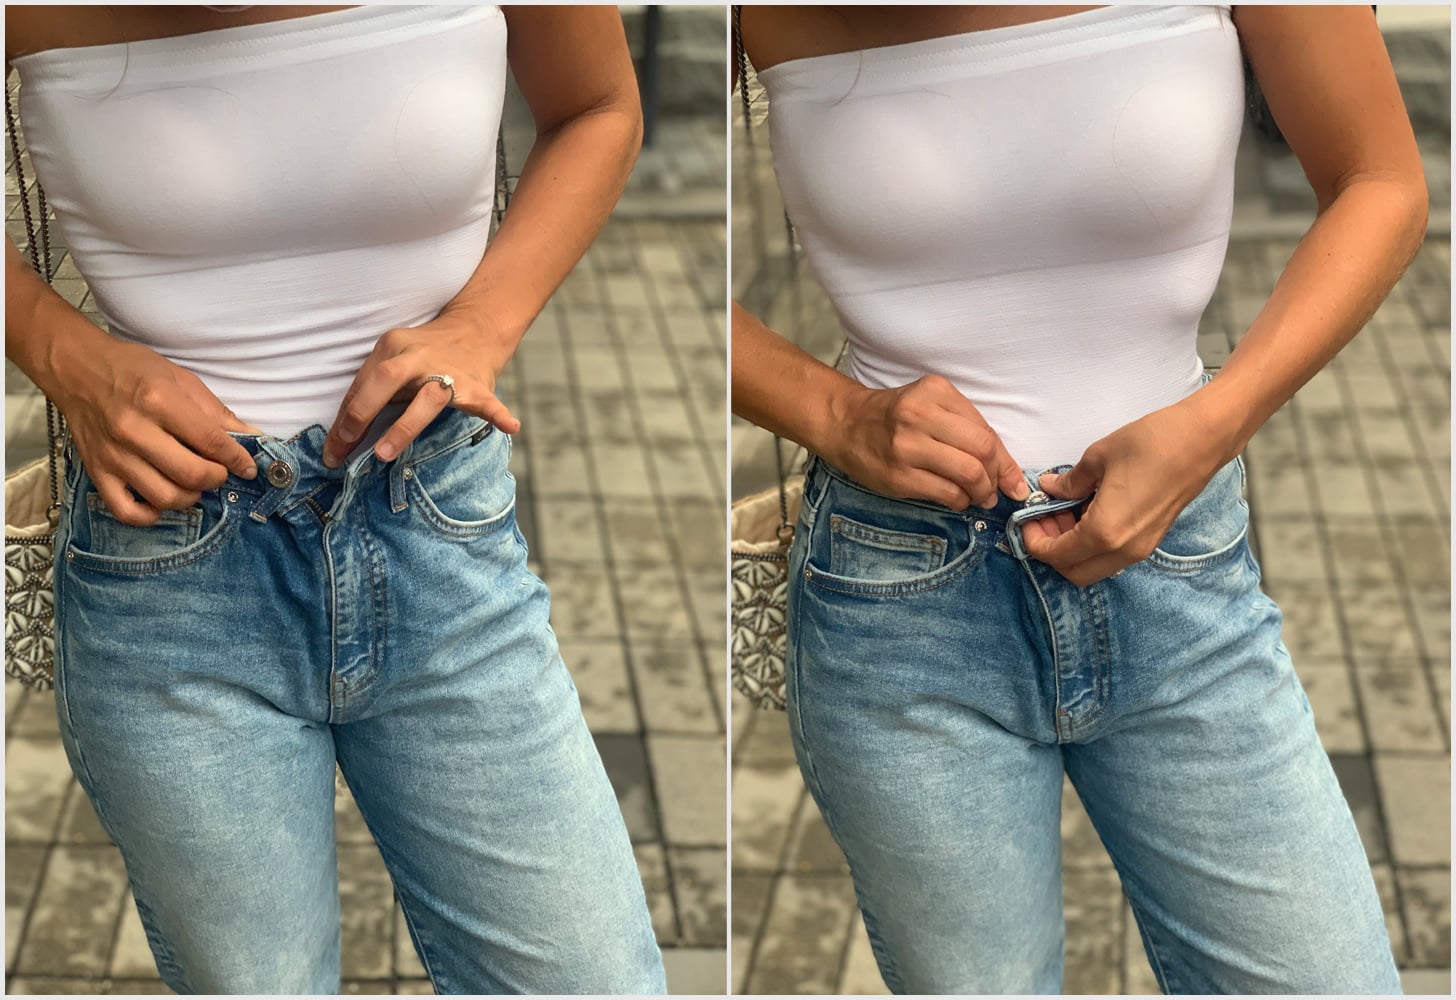 How to tighten pants without belt loops, by Stylescentre.com